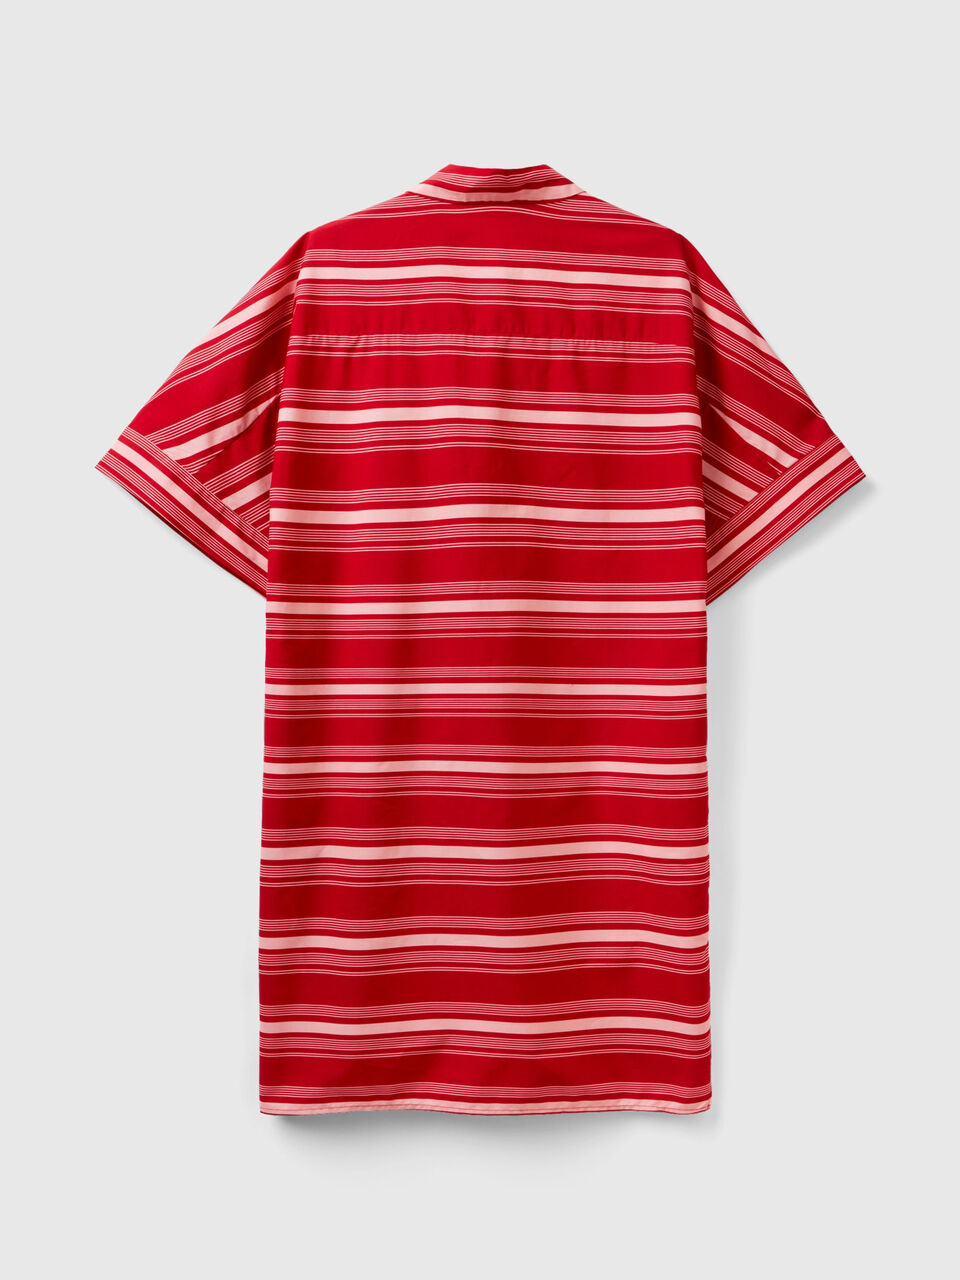 Red striped shirts